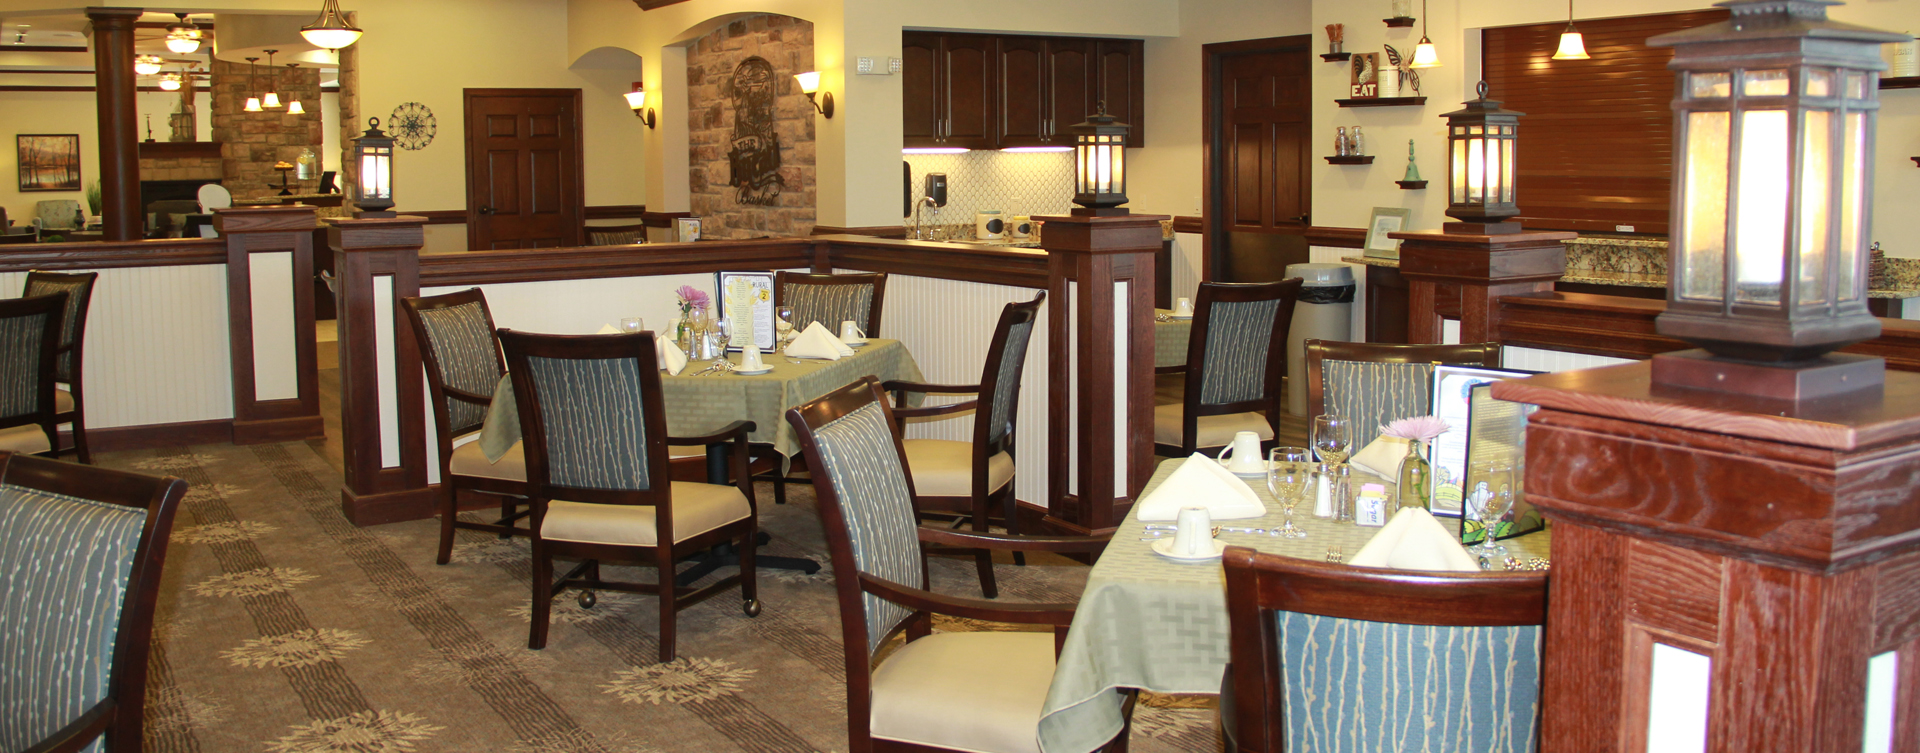 Food is best when shared with friends in the dining room at Bickford of Chesterfield